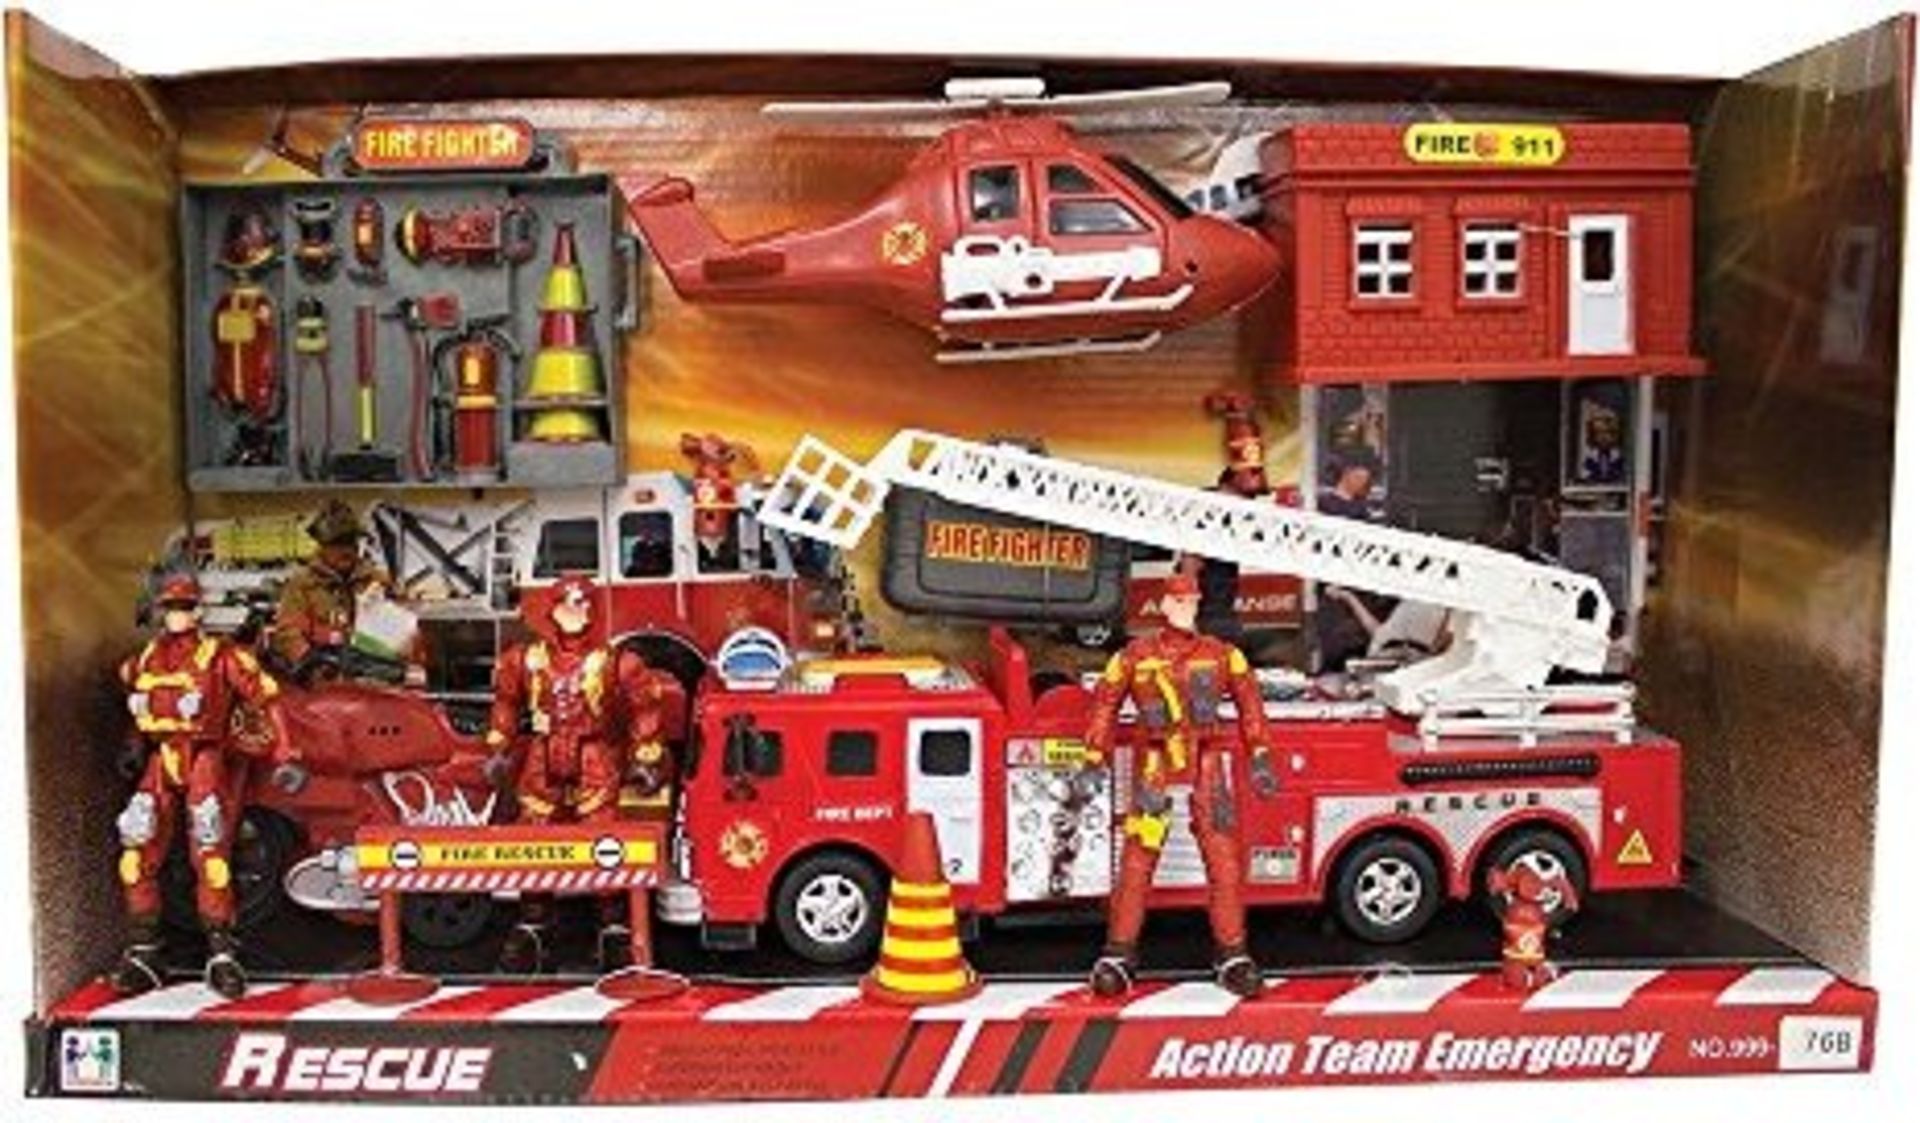 V Brand New Action Team Emergency rescue Action Play SetWith 3 Emergency Crew - Fire Engine -